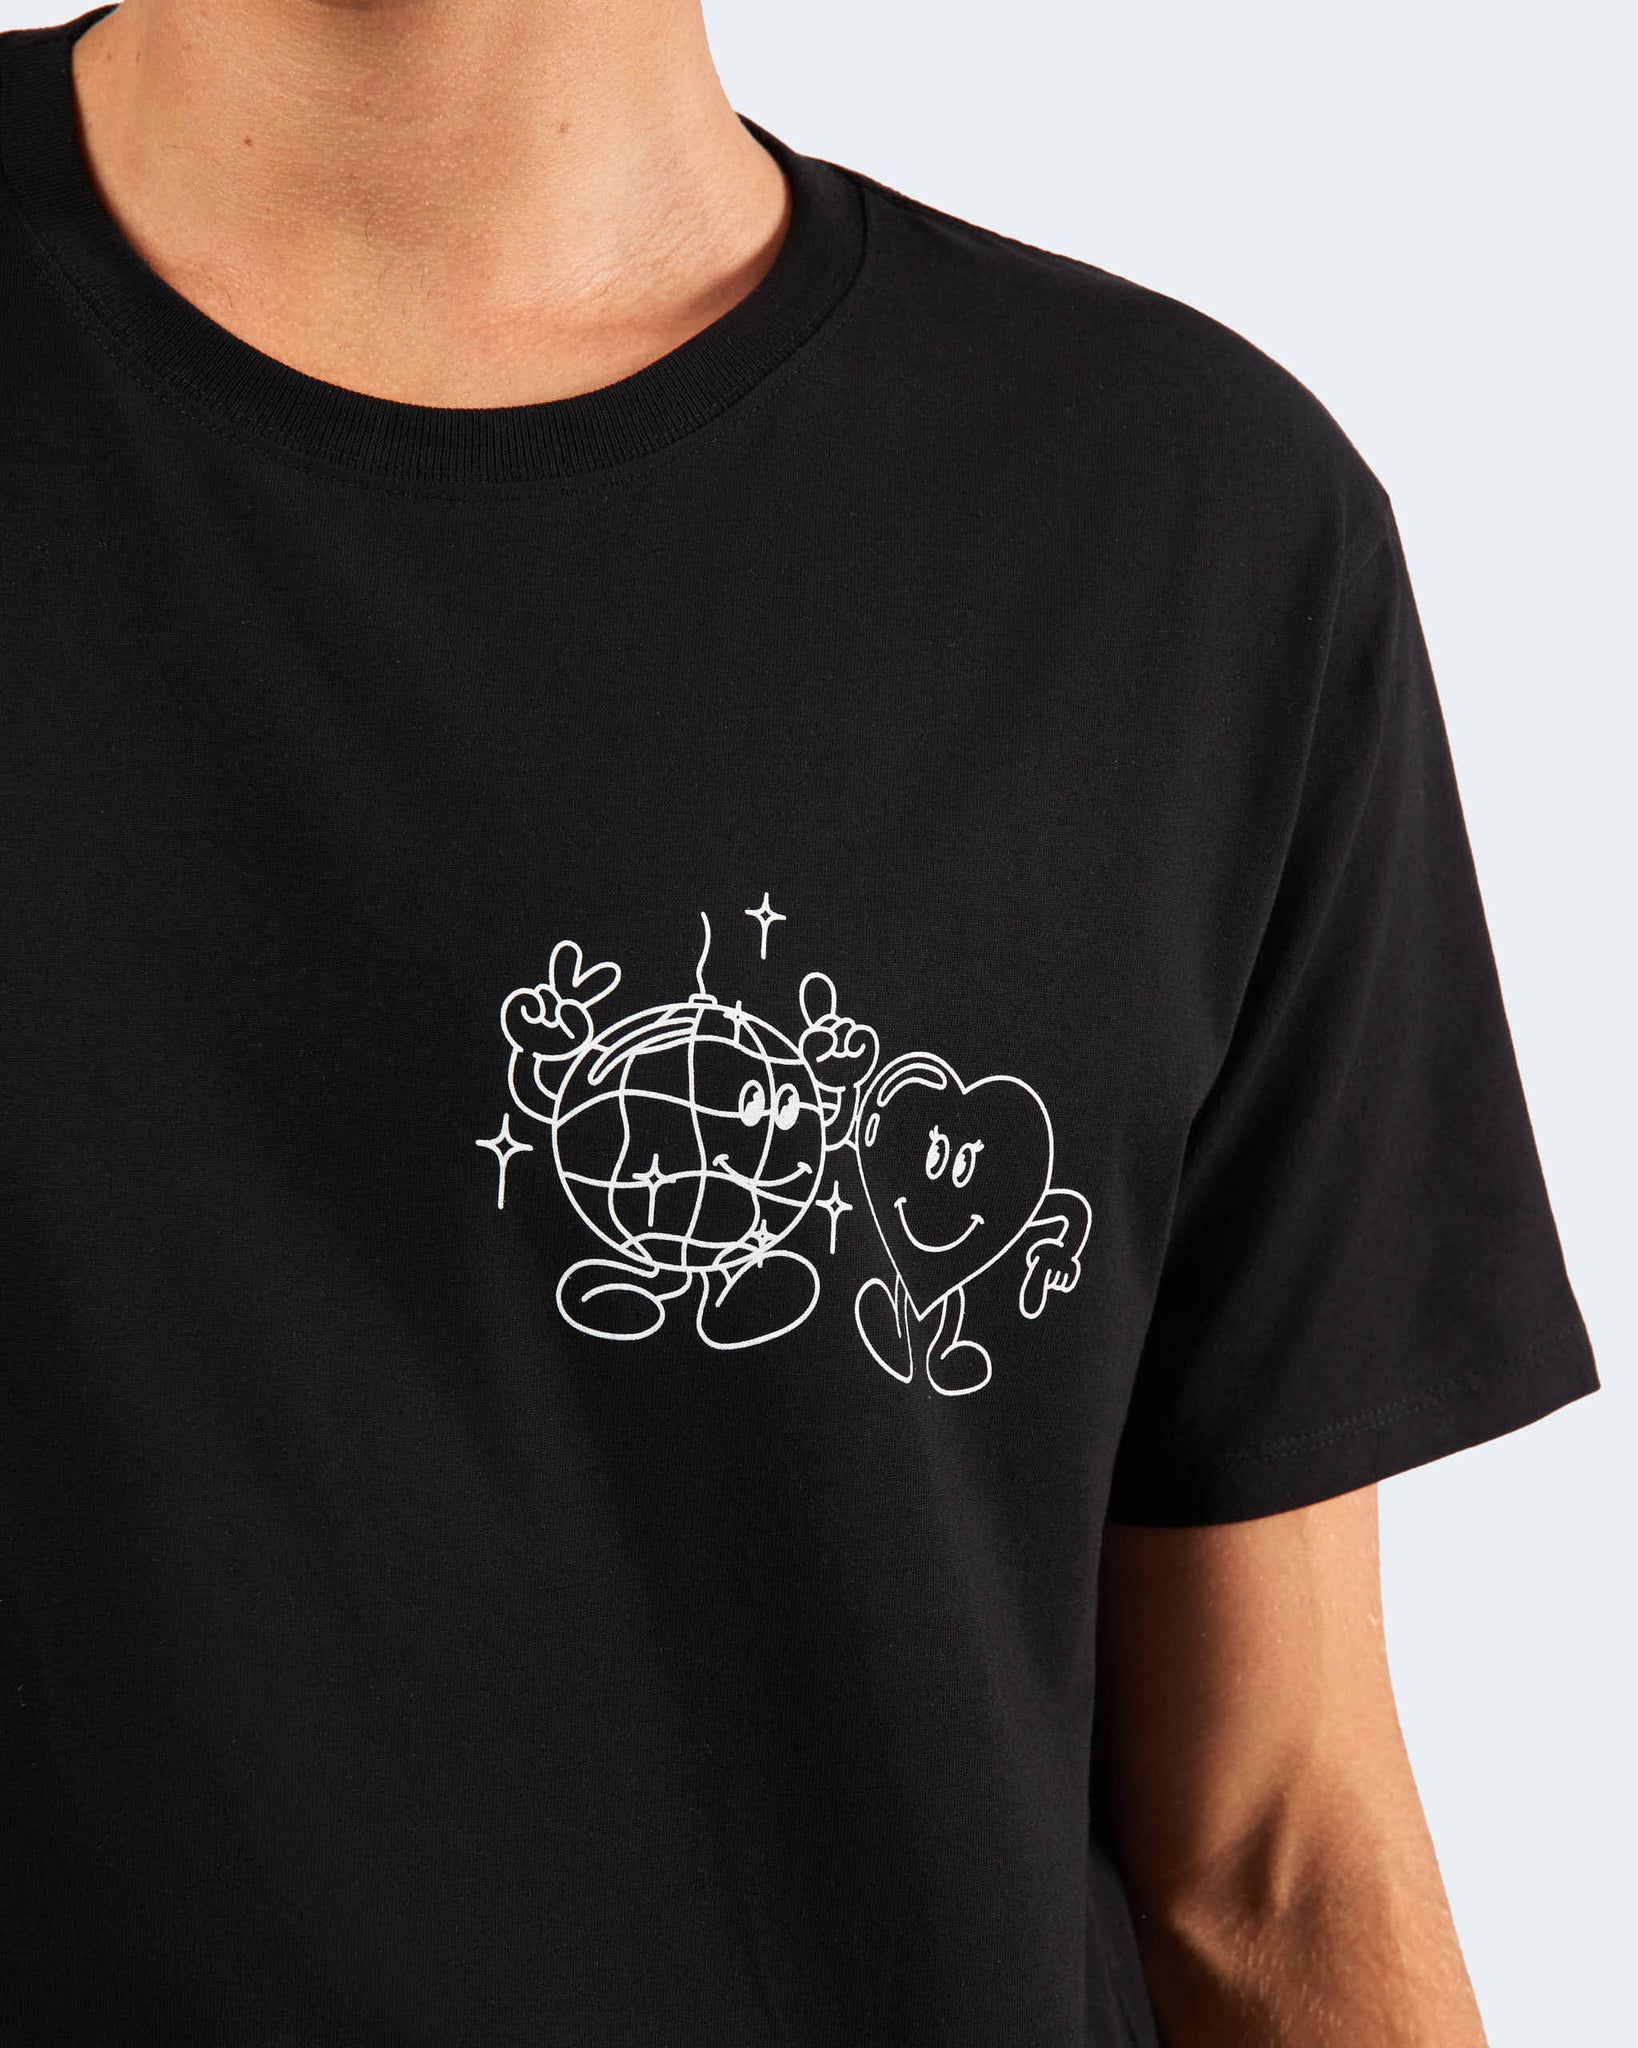 Ways To Spread Happiness Tee - Black & White